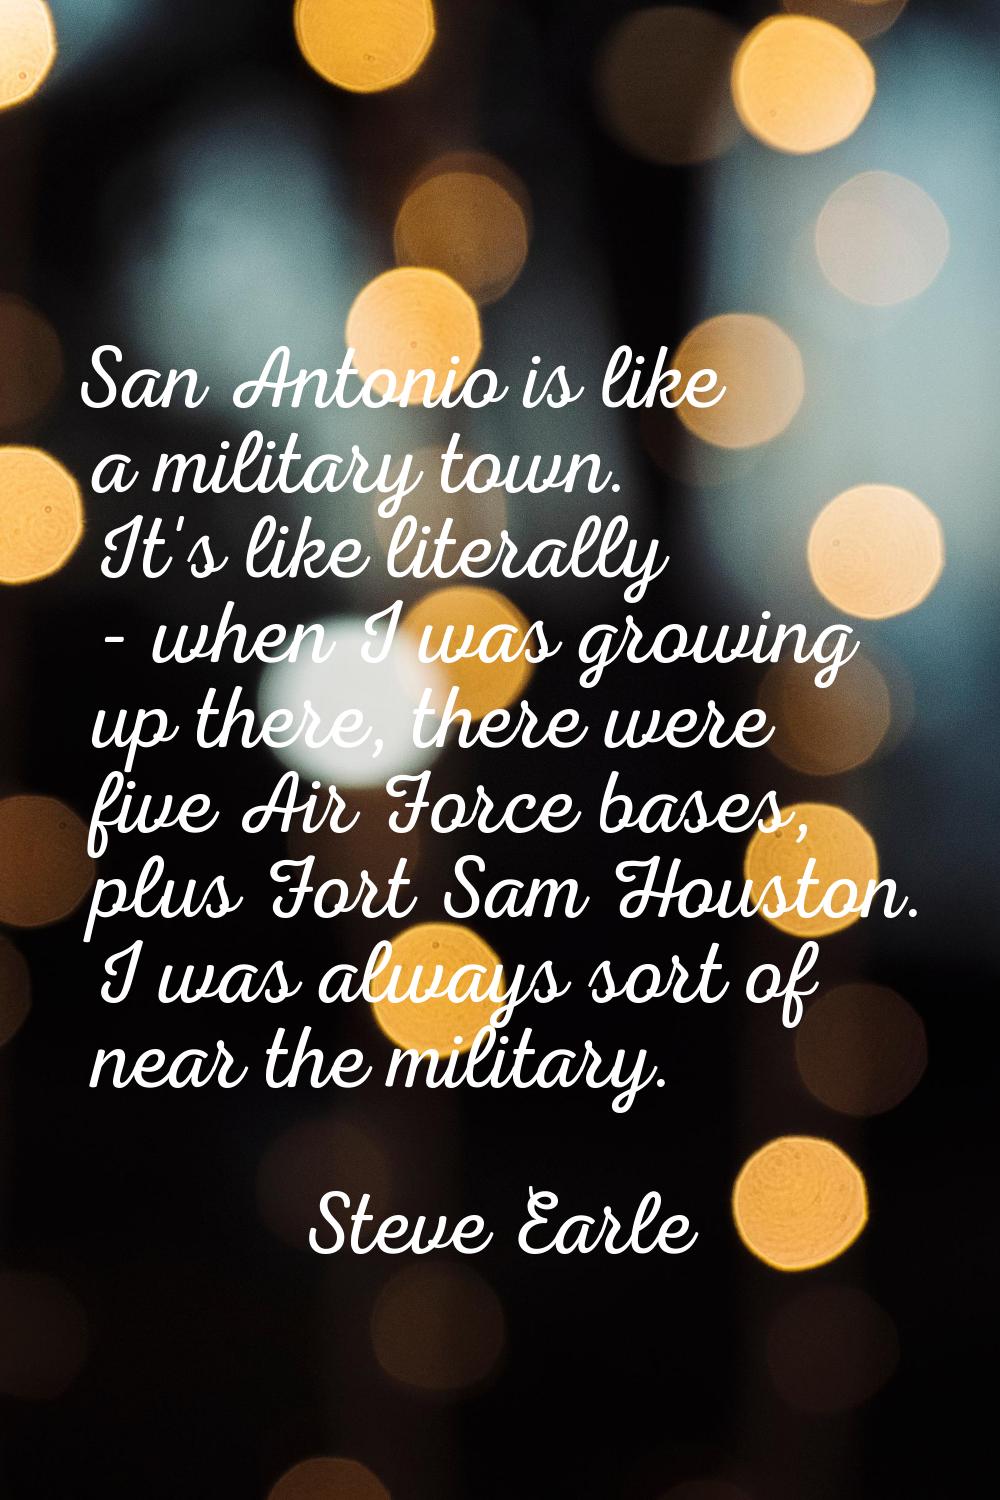 San Antonio is like a military town. It's like literally - when I was growing up there, there were 